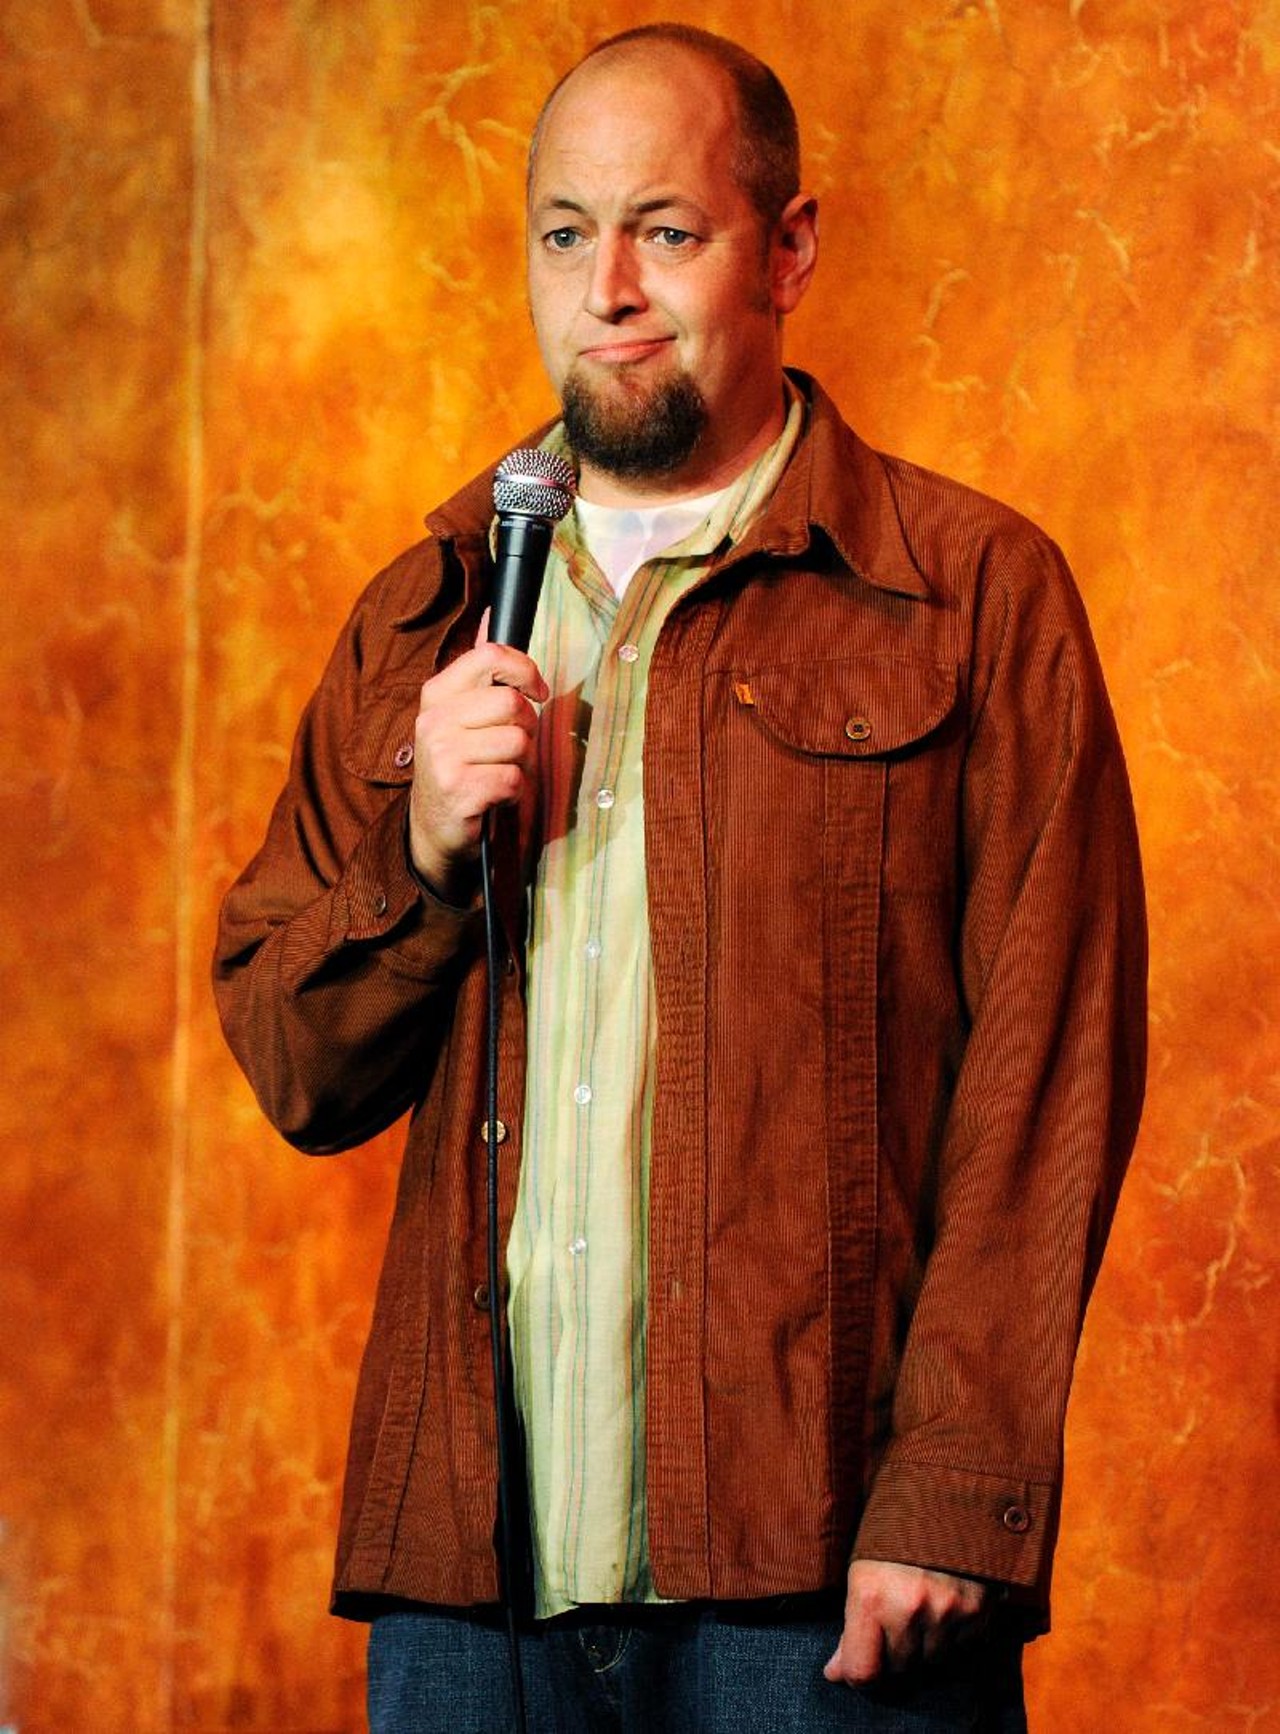 John Evans  When: Sun., June 26 In his shows, comedian John Evans, who has previously opened for comedians such as George Carling, Dave Chappelle and Lewis Black, jokes about his various personal experiences, such as his scatting talents, his interesting dating and his rules for shopping at a thrift store. He performs tonight at 7 at Hilarities. Tickets are $13 and $18.